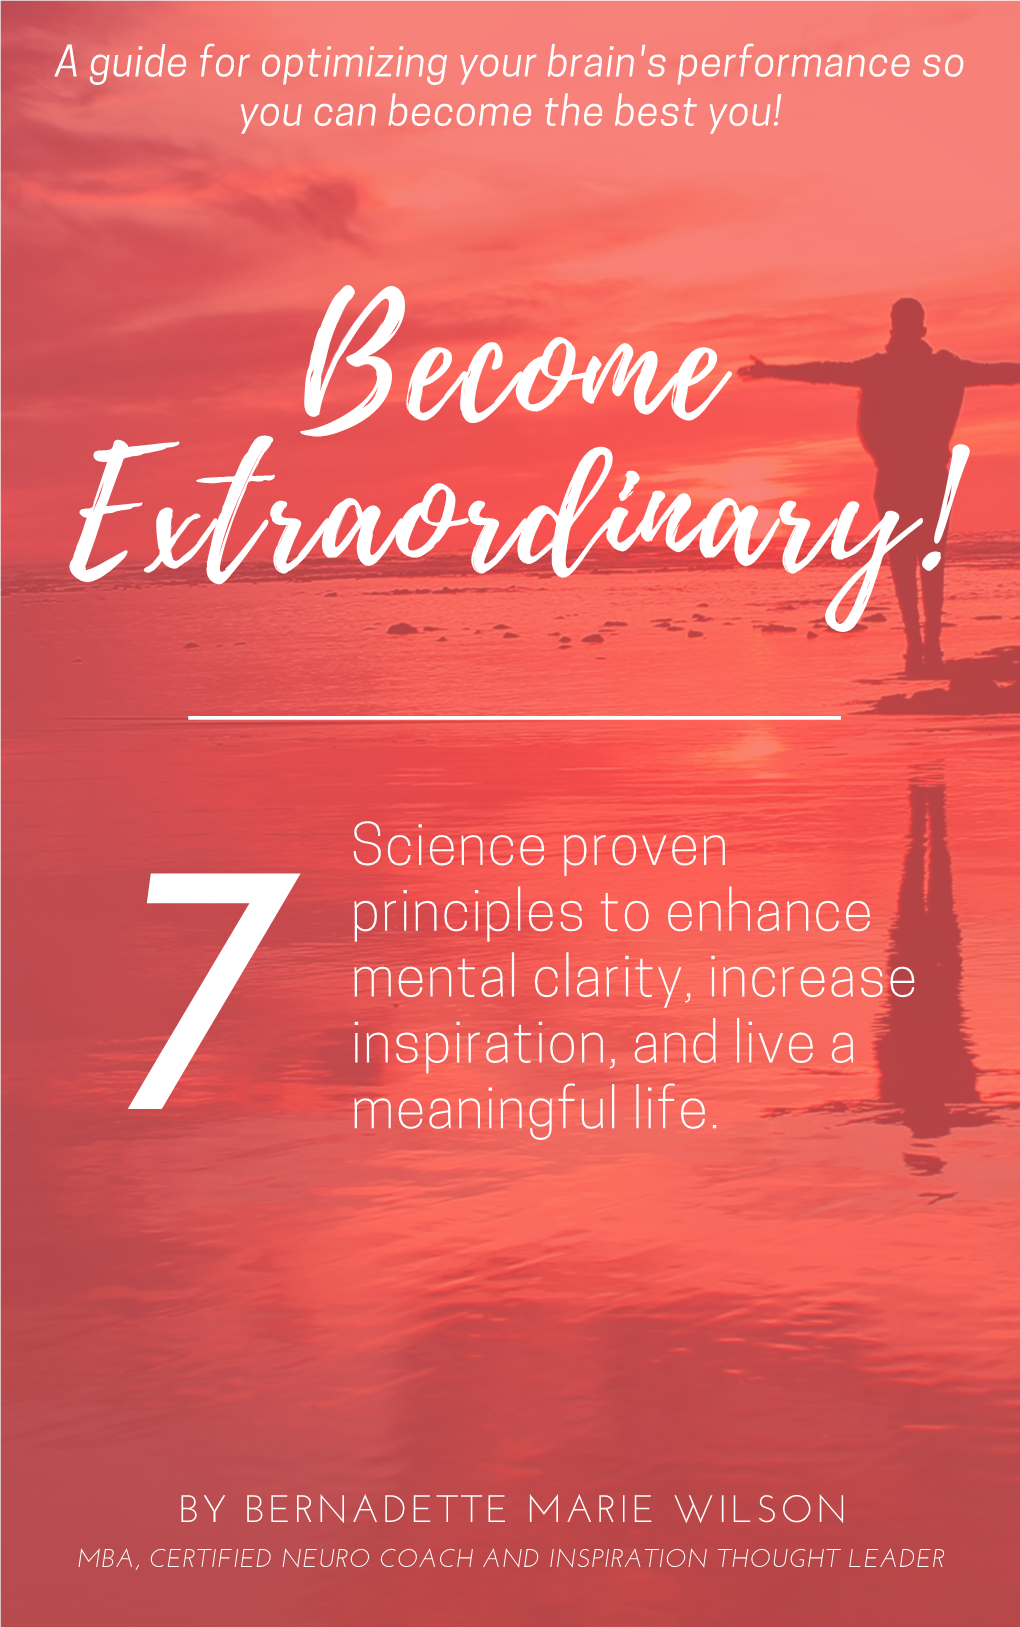 Science Proven Principles to Enhance Mental Clarity, Increase Inspiration, and Live a 7 Meaningful Life